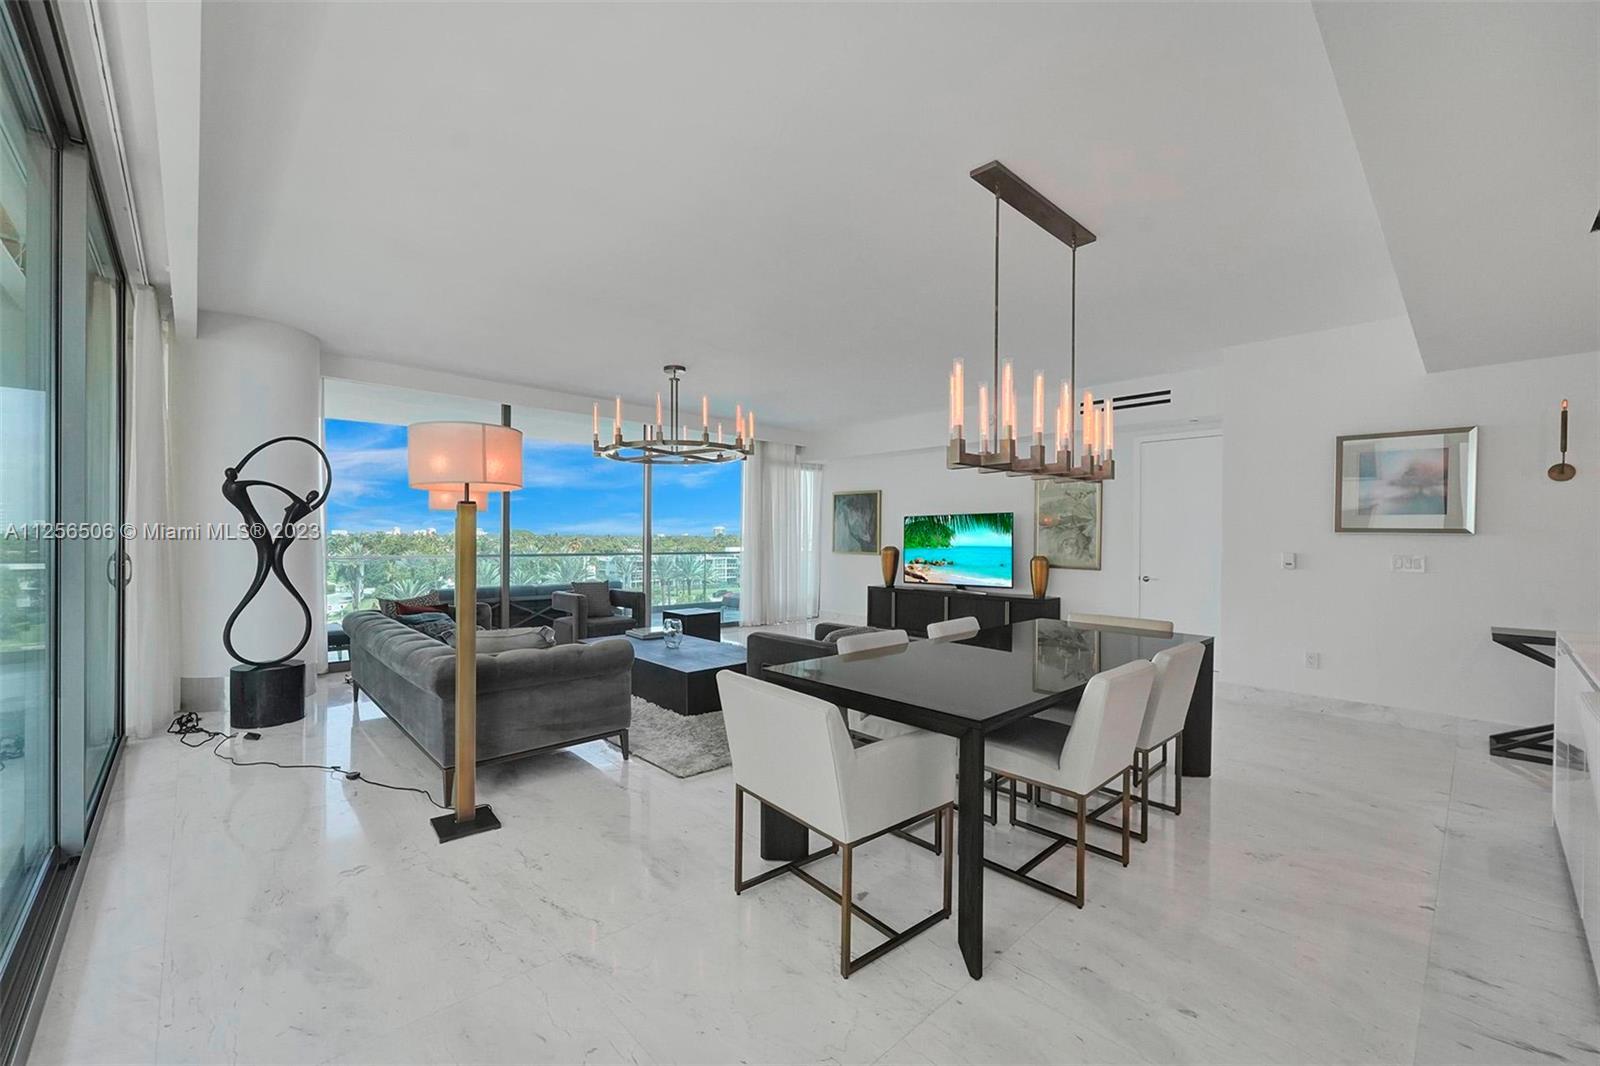 OCEANA IN BAL HARBOUR: gorgeous spacious 2/2 condo, 1,805 sqf. Beautiful intracoastal views from thi